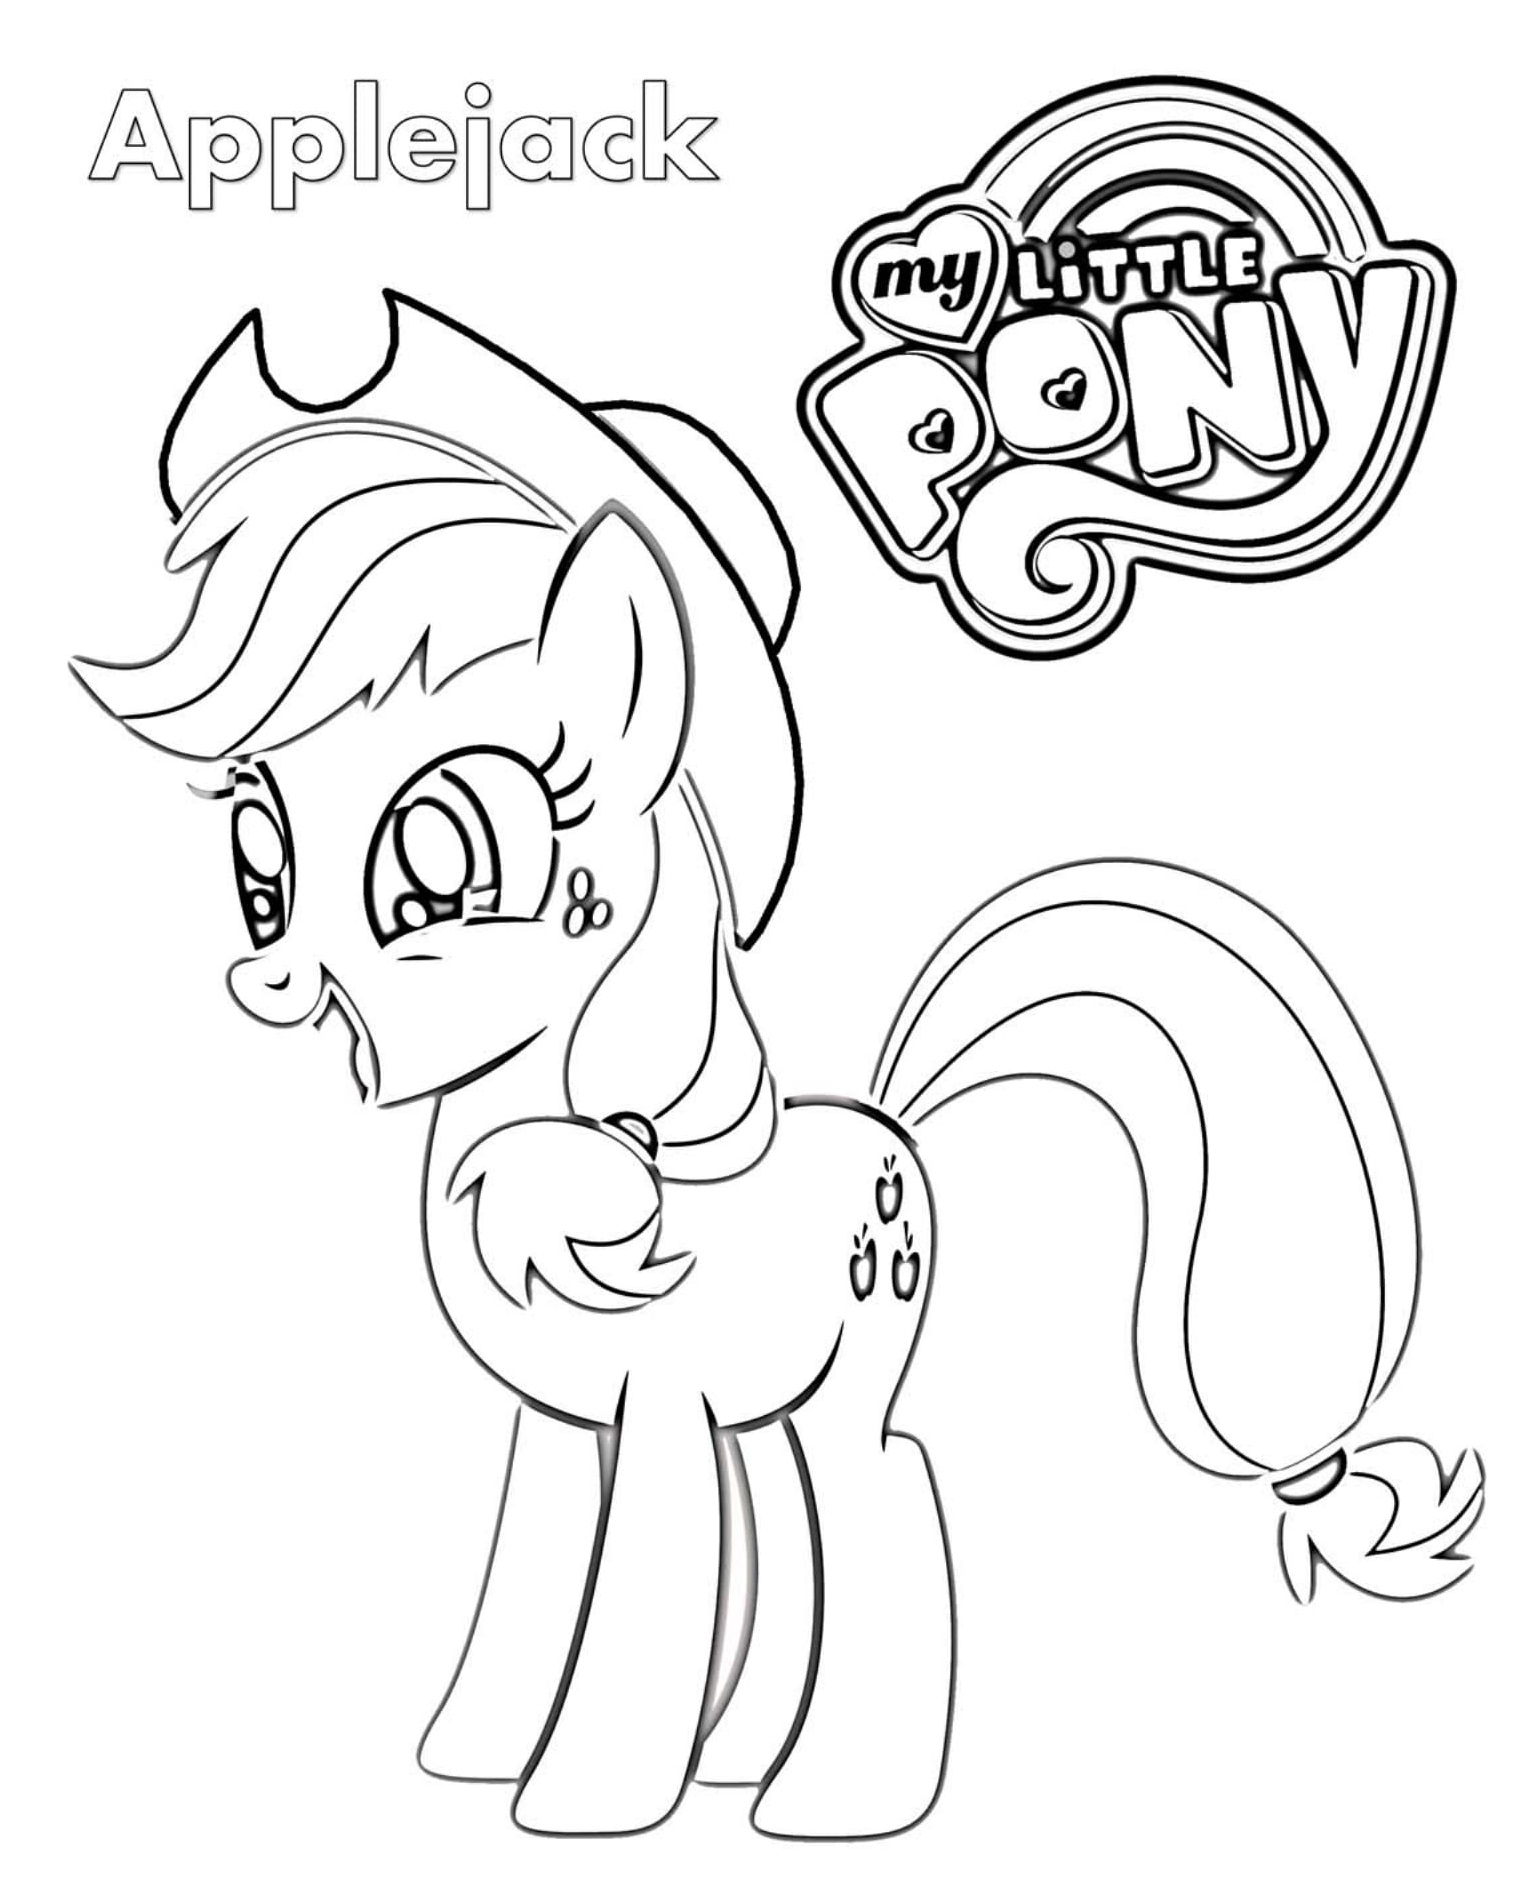 Applejack MLP Coloring Pages   Coloring Cool